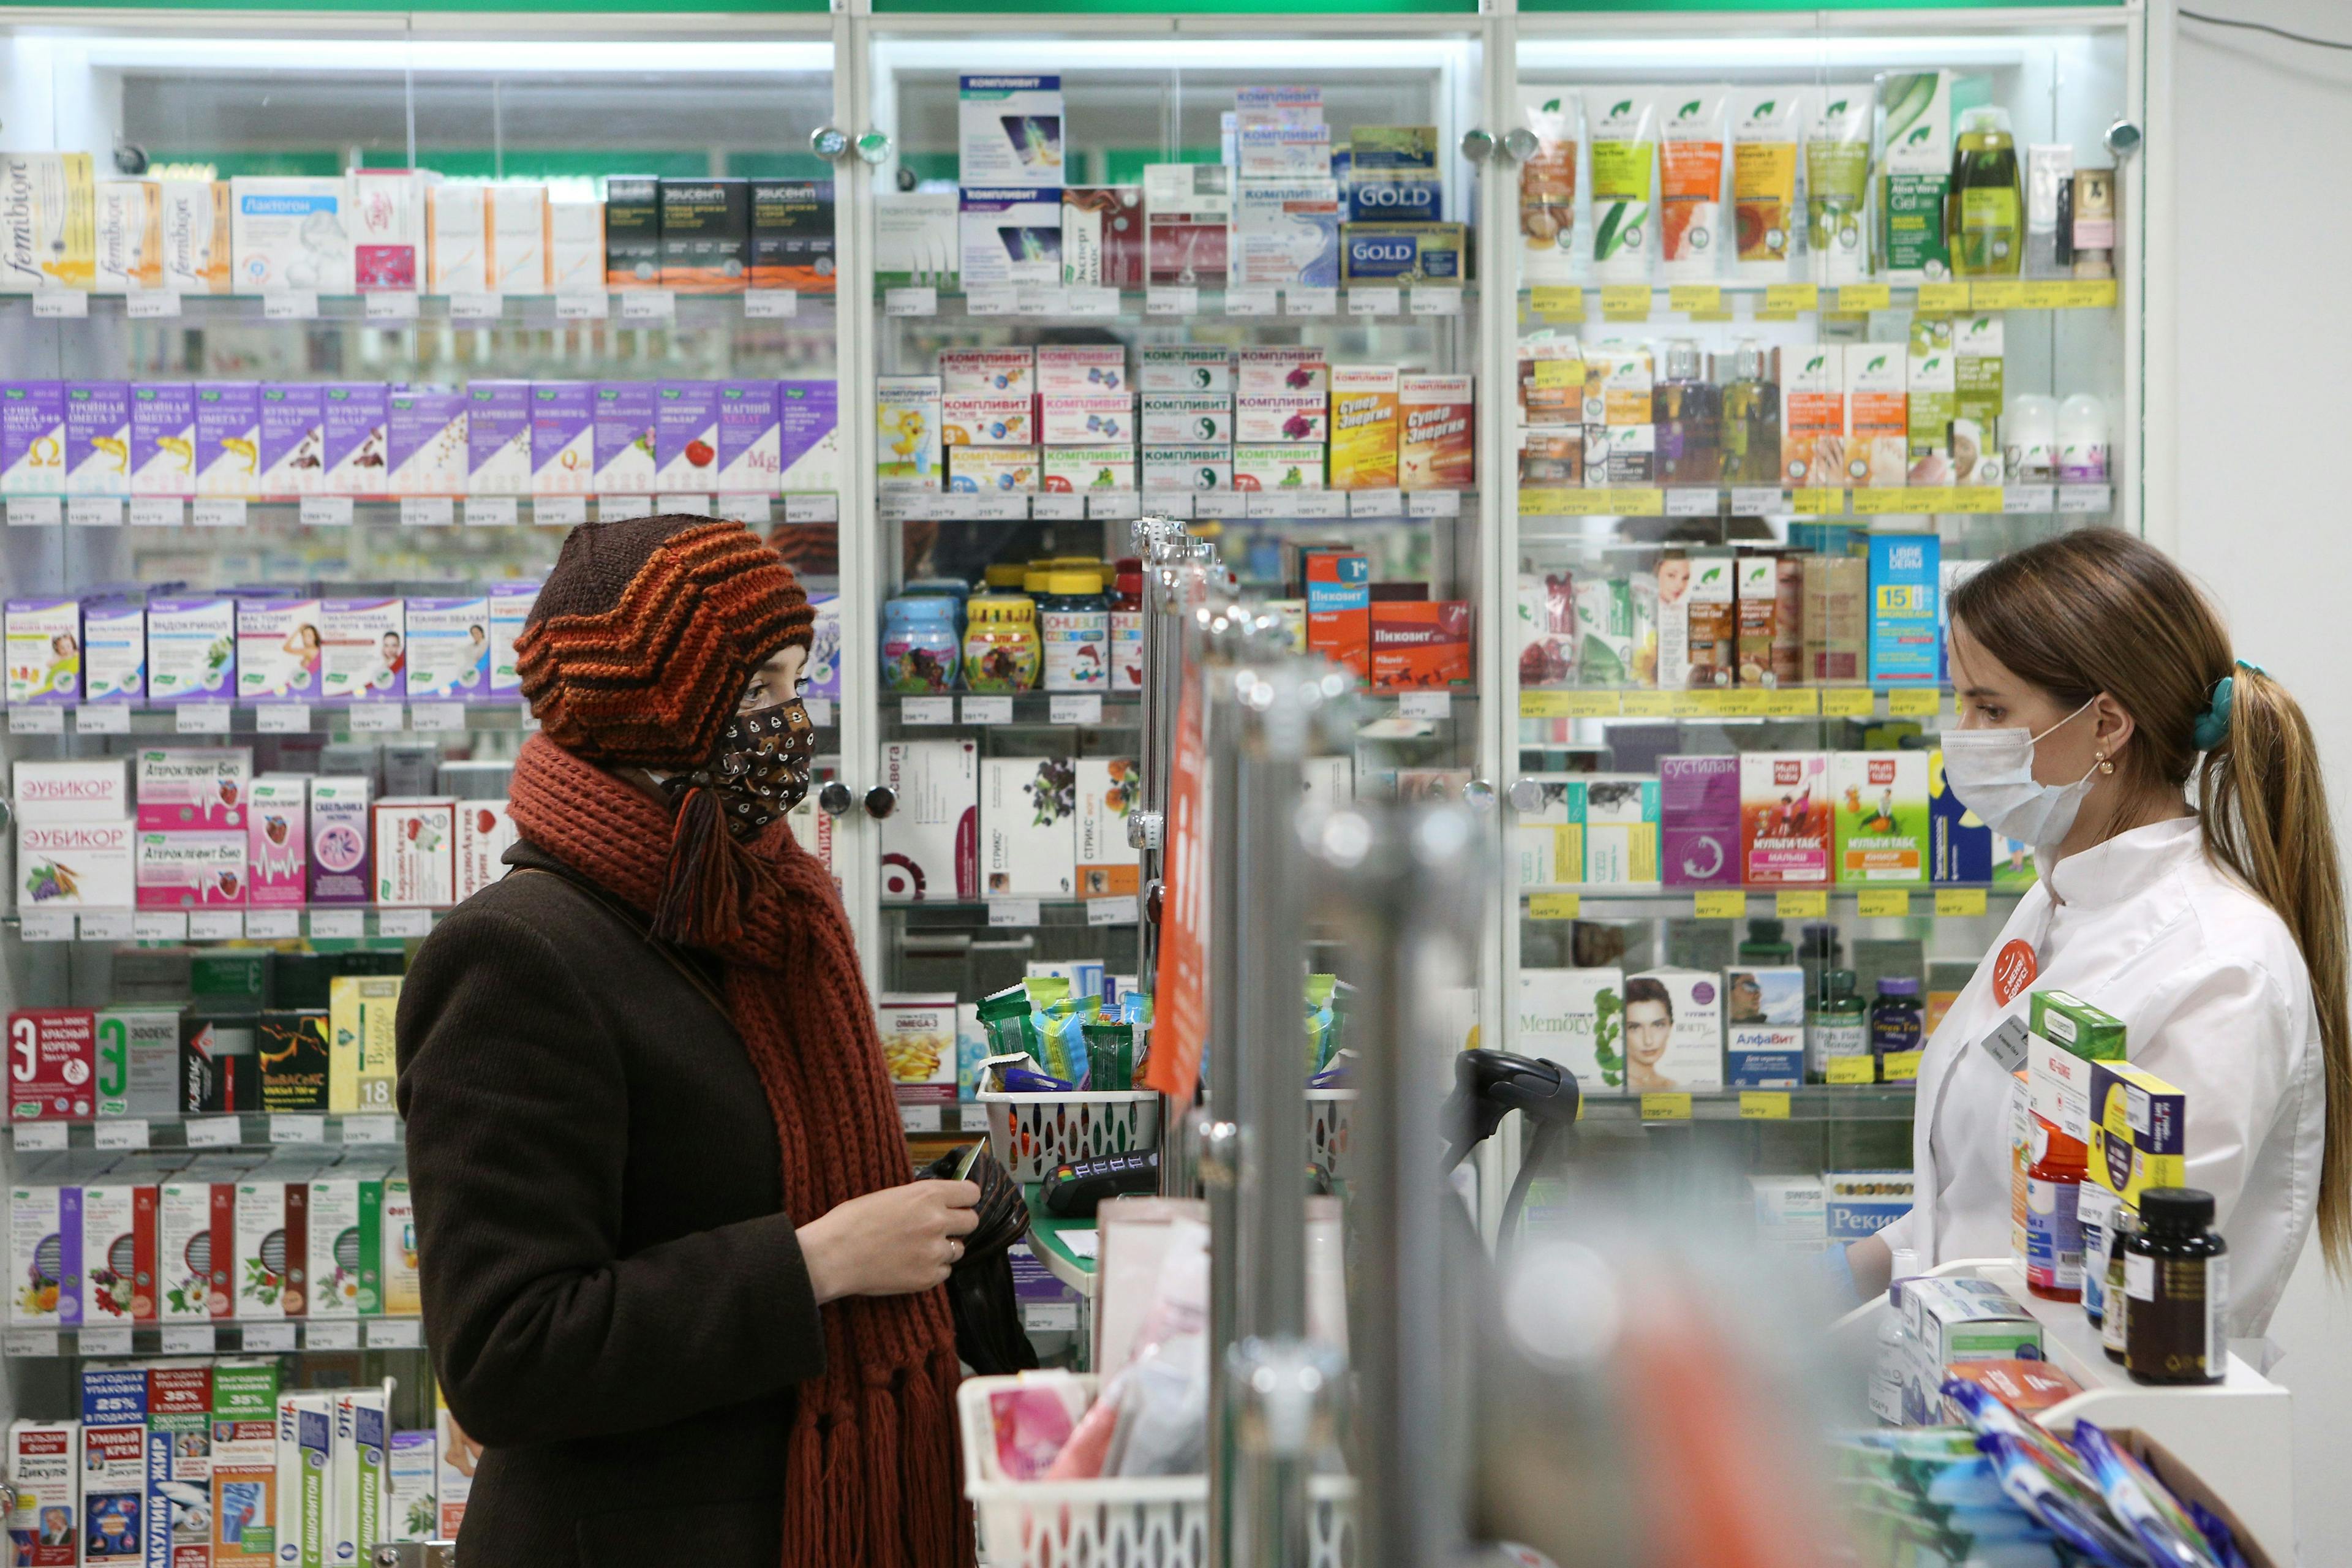 With Declining Reimbursements, Community Pharmacies Have Been Hit Hard by the Pandemic